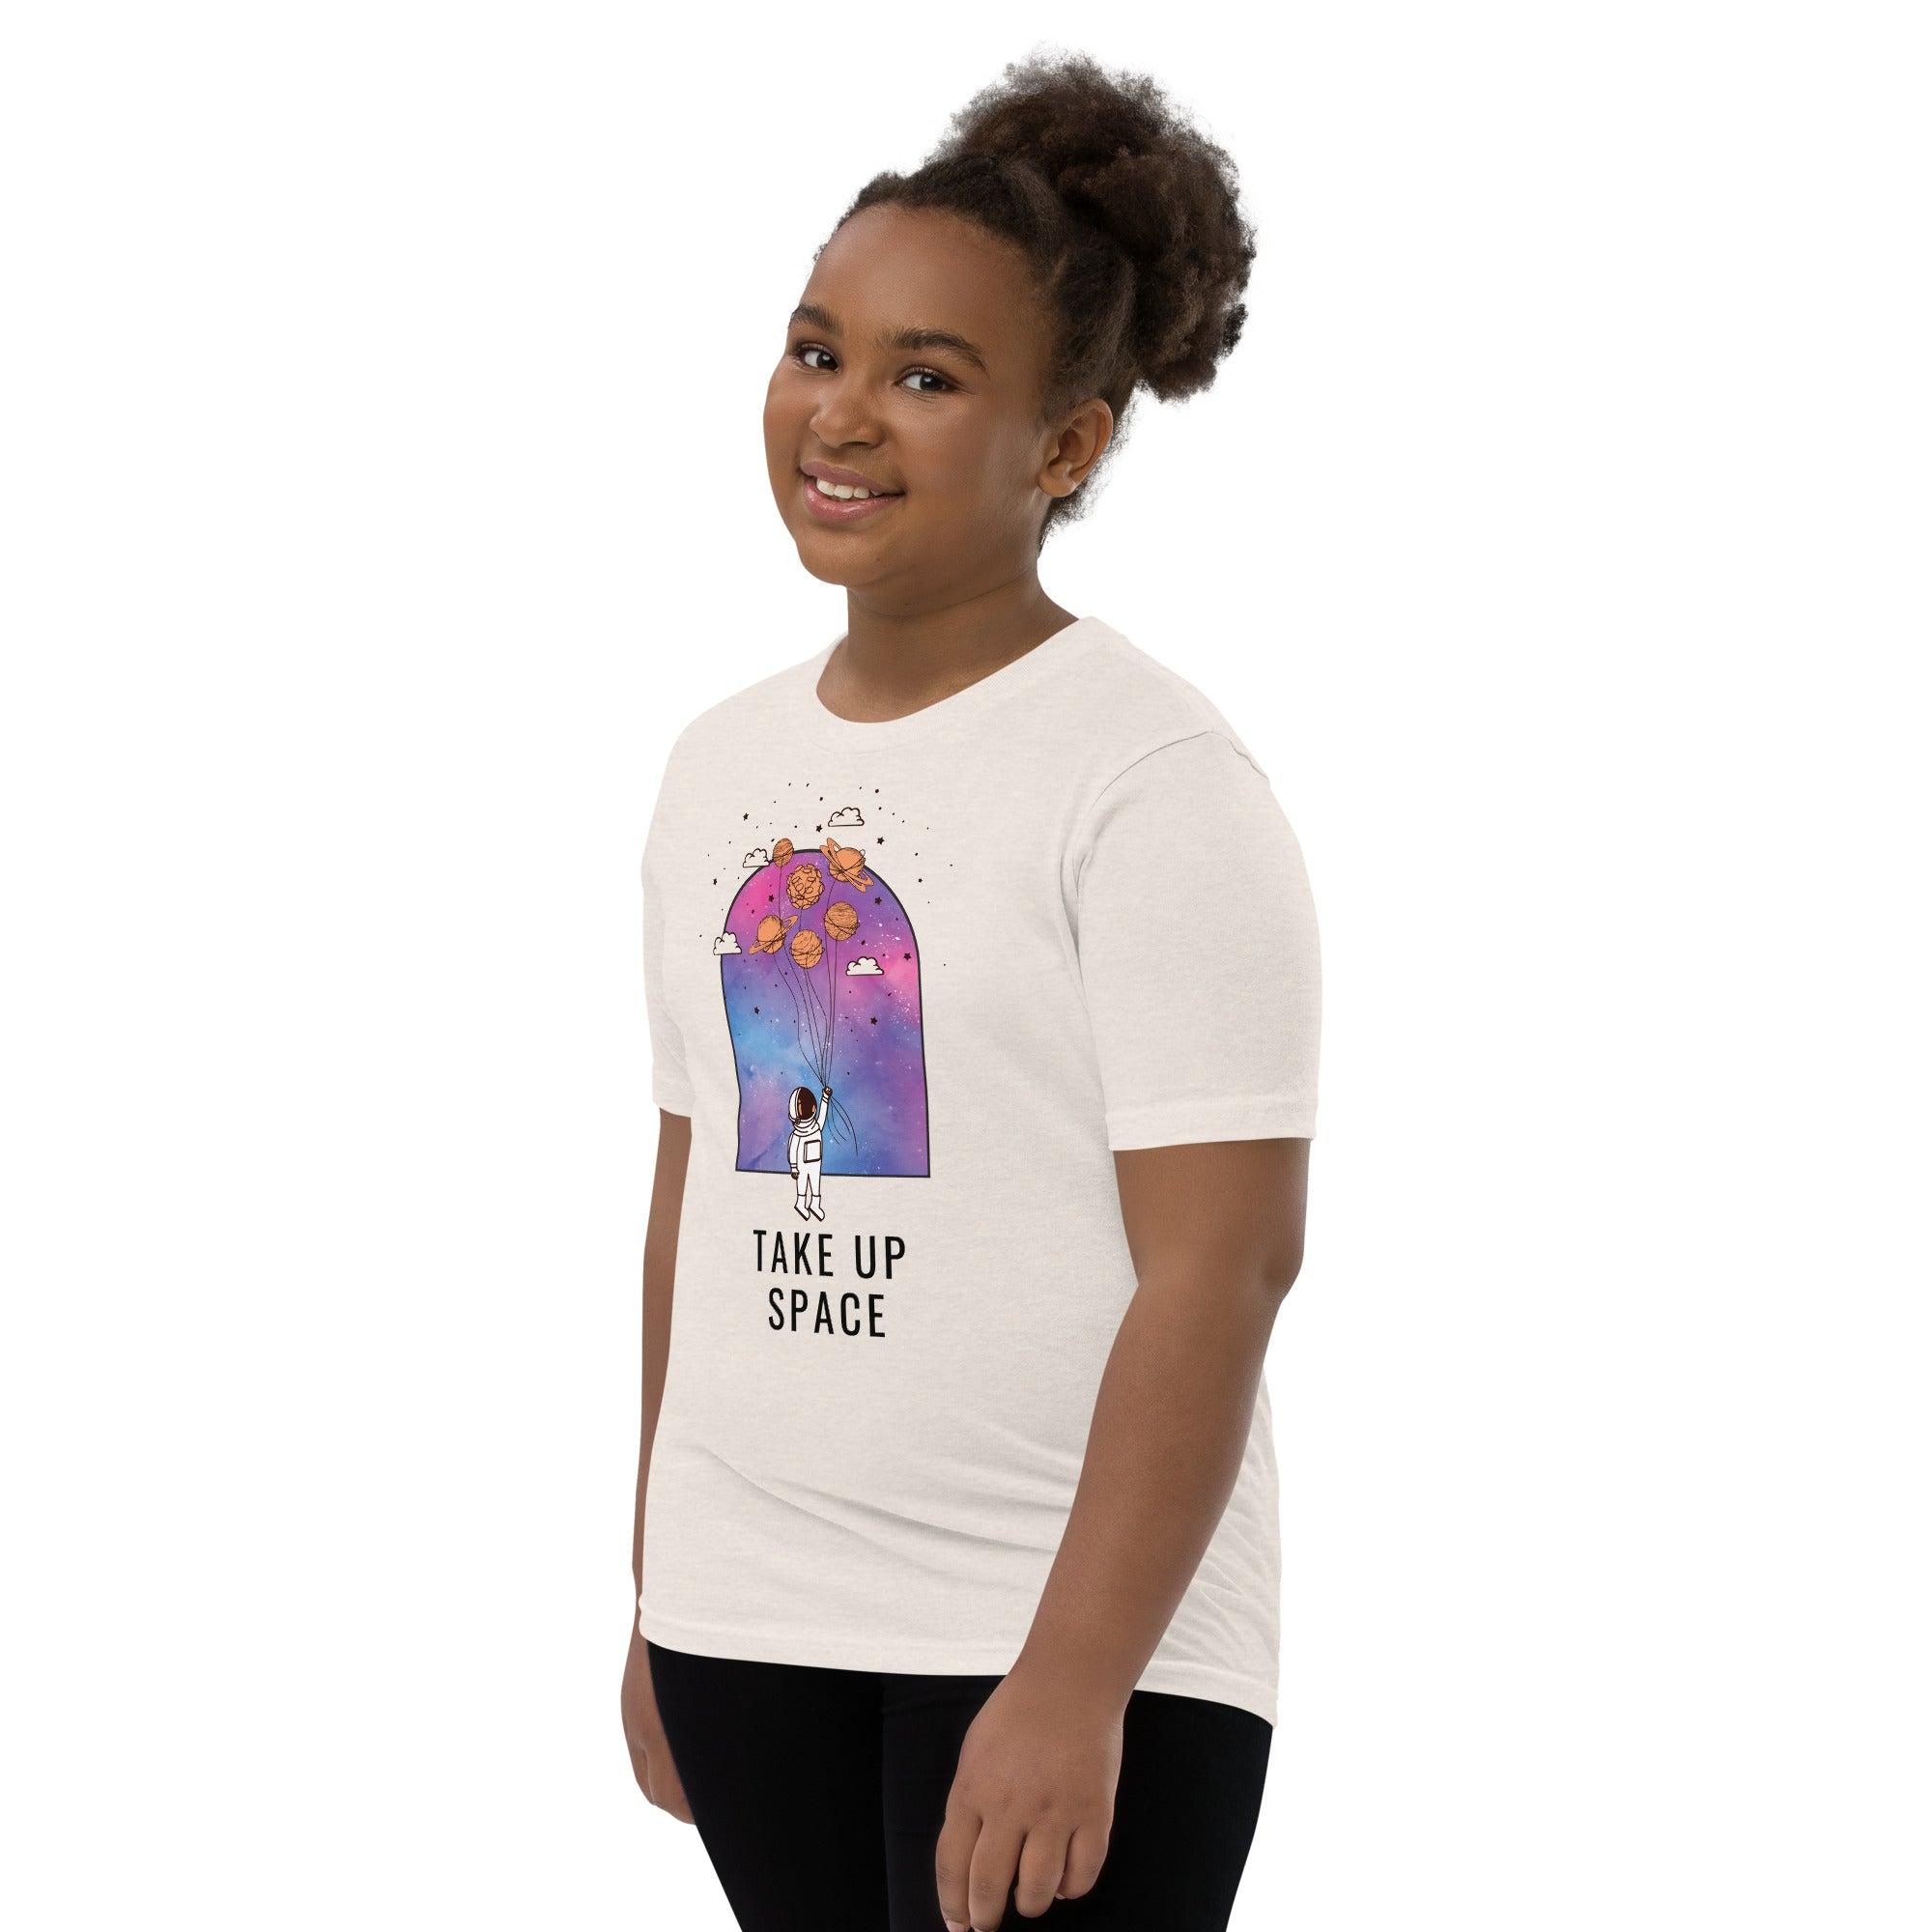 Take Up Space - Youth Short Sleeve T-Shirt